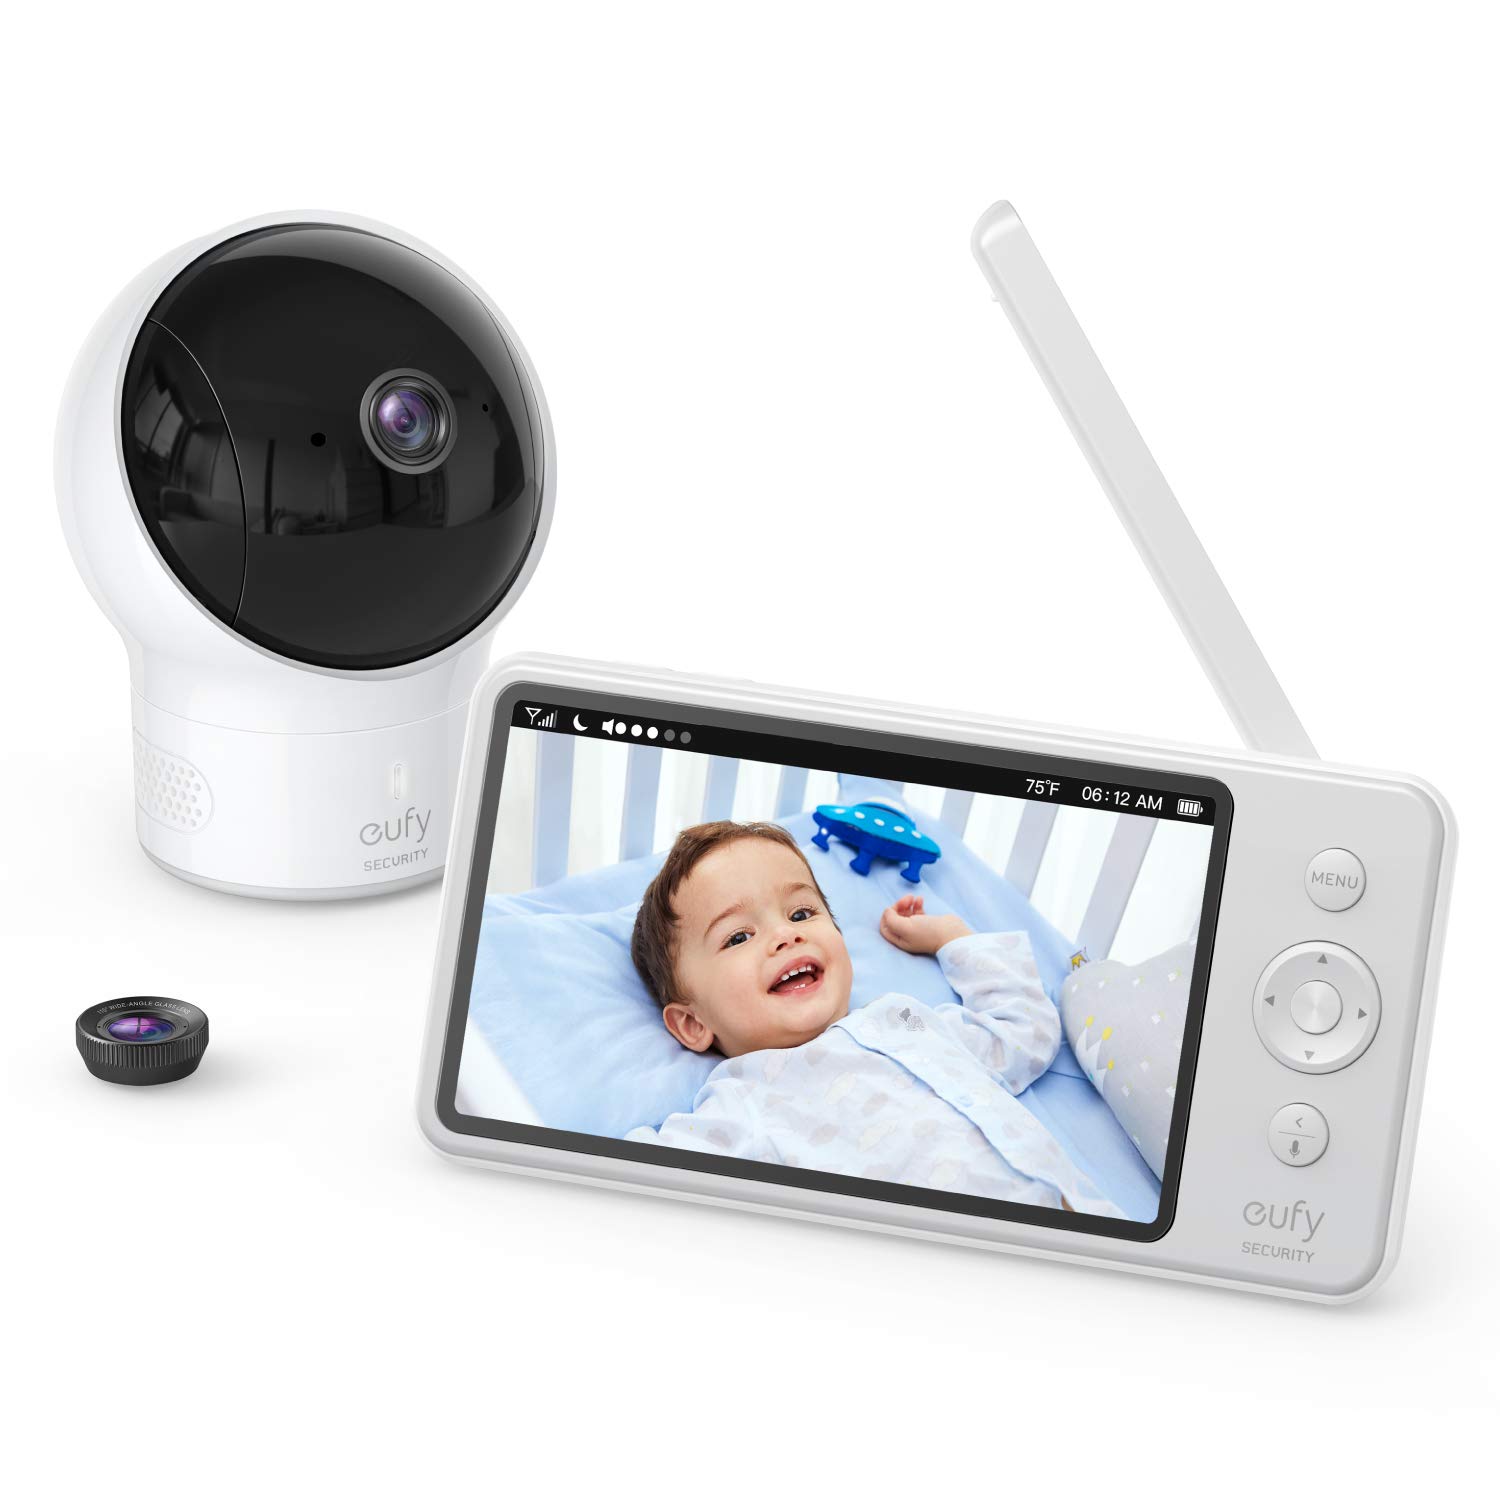 eufy Security Spaceview Video Baby Monitor E110 with Camera and Audio, Security Camera, 720p HD Resolution, Night Vision, 5" Dis